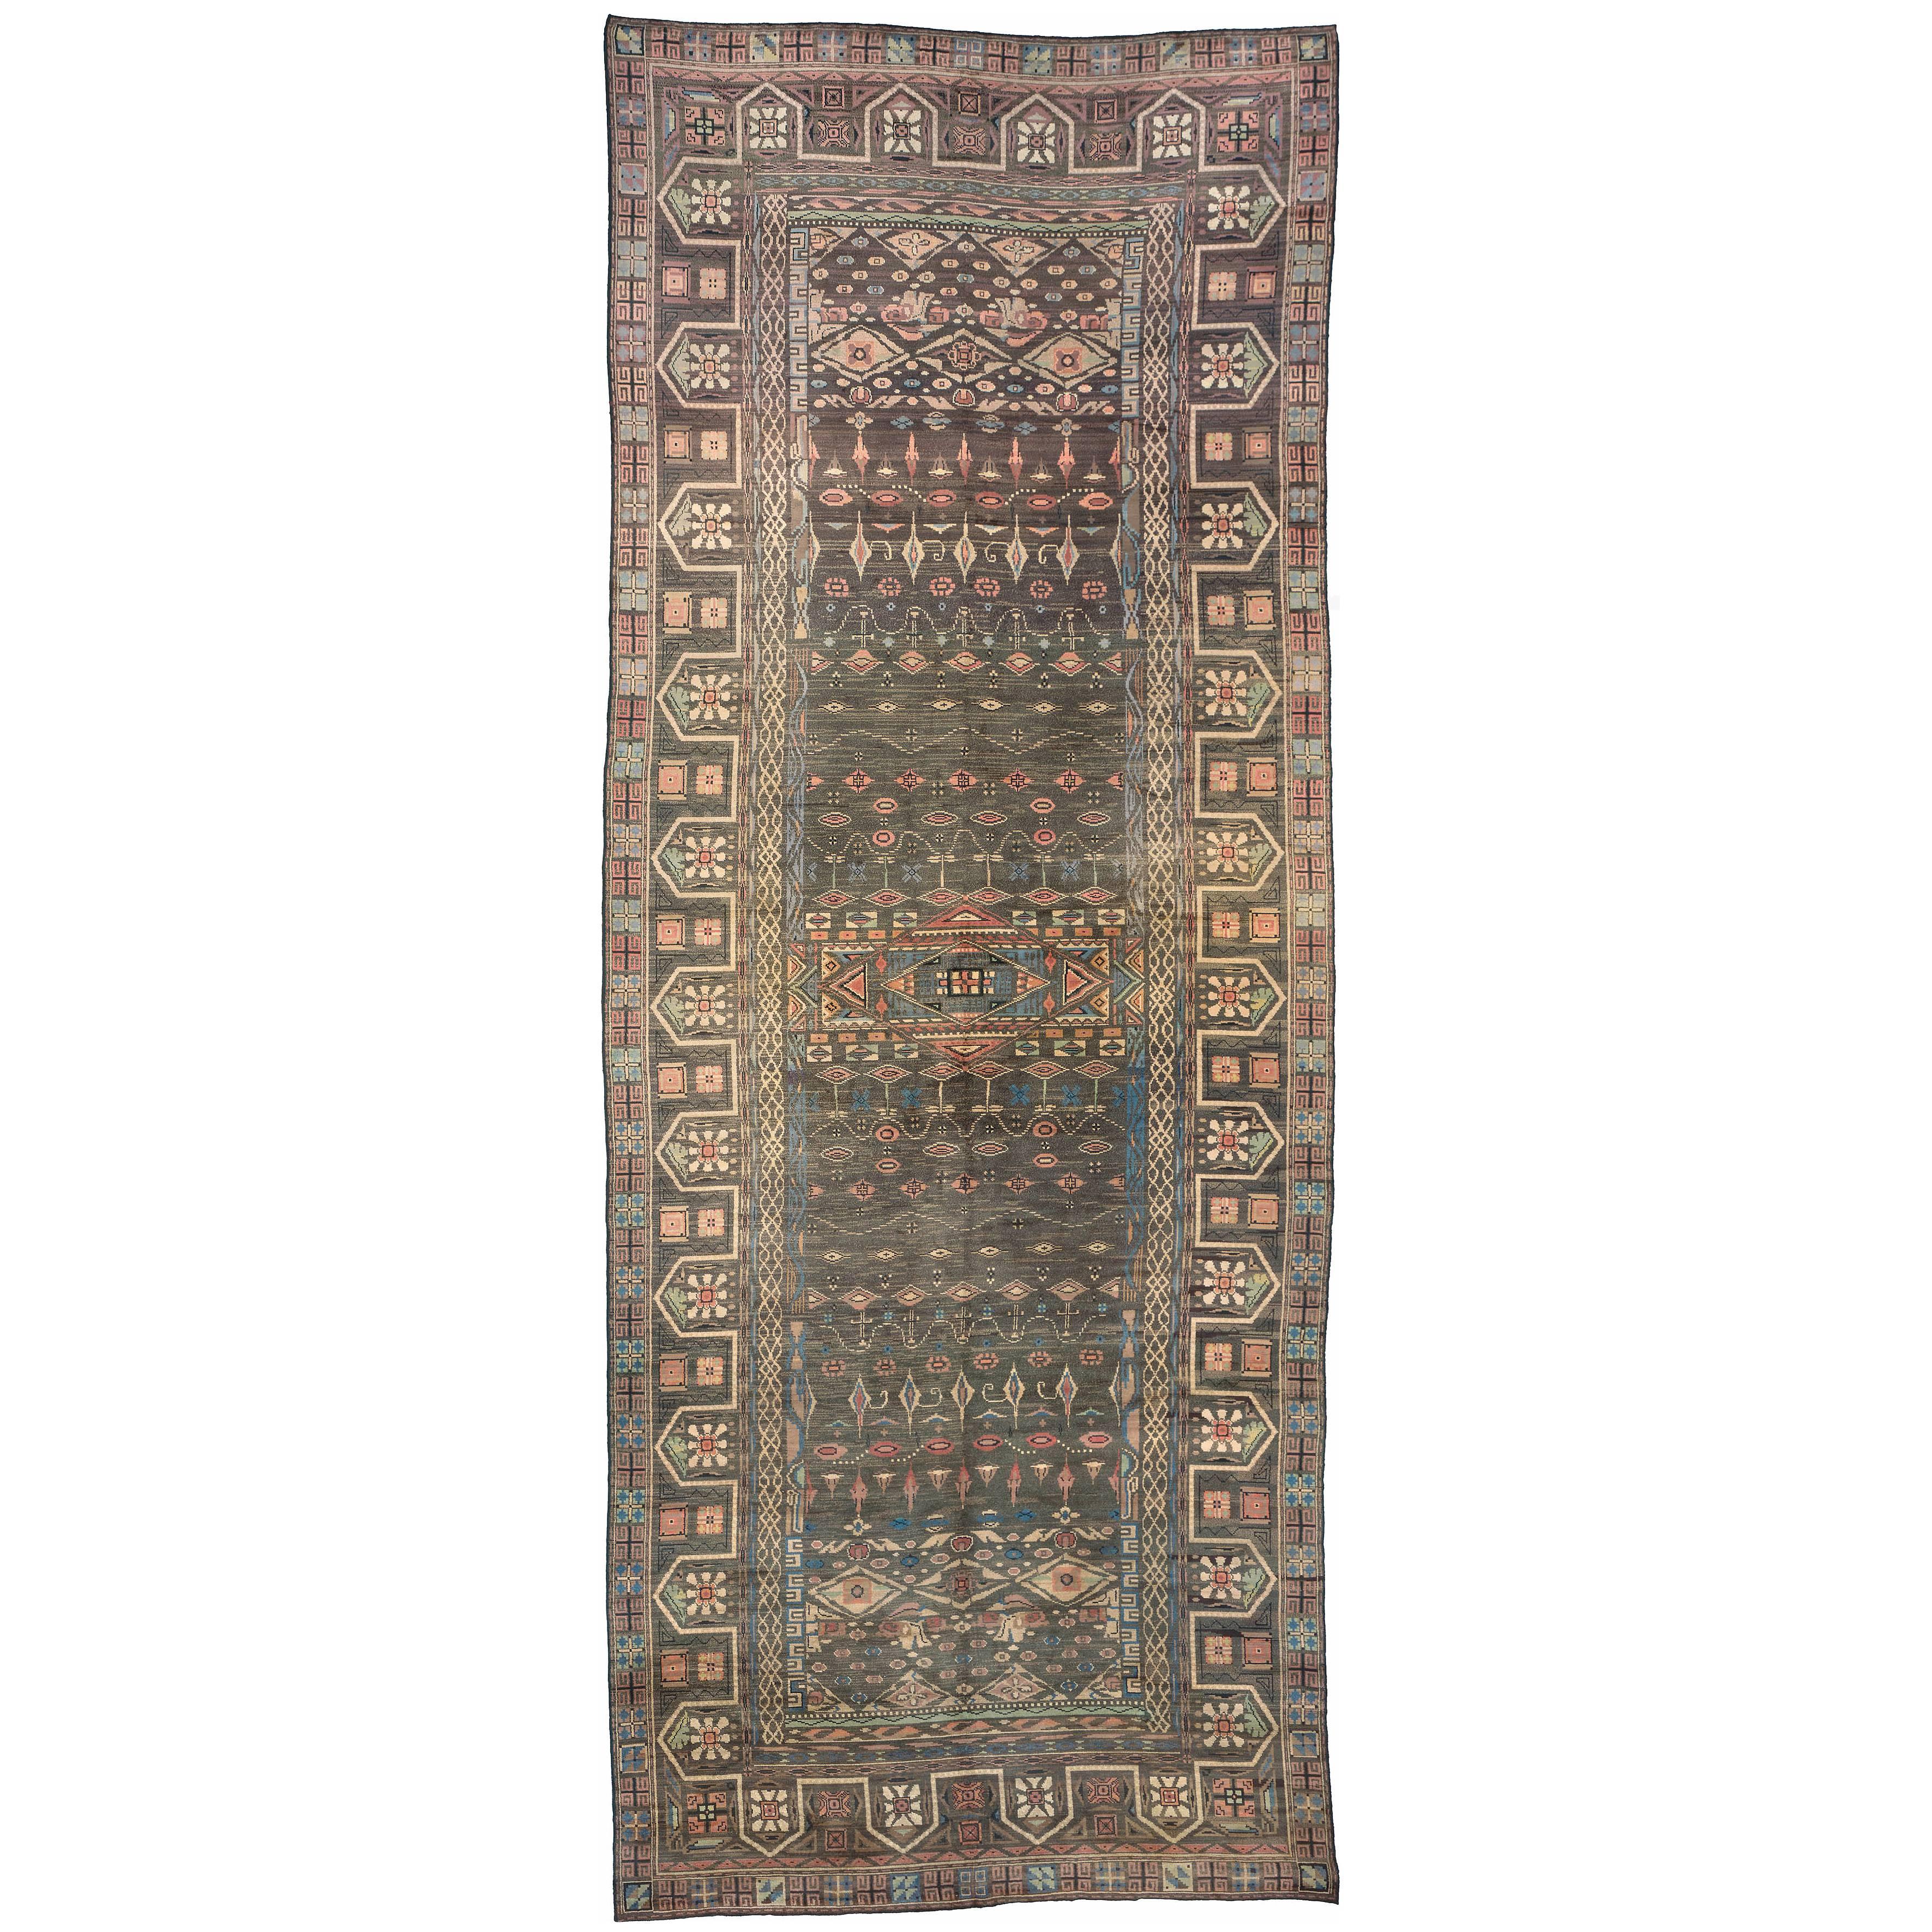 Early 20th Century Swedish Pile Carpet For Sale